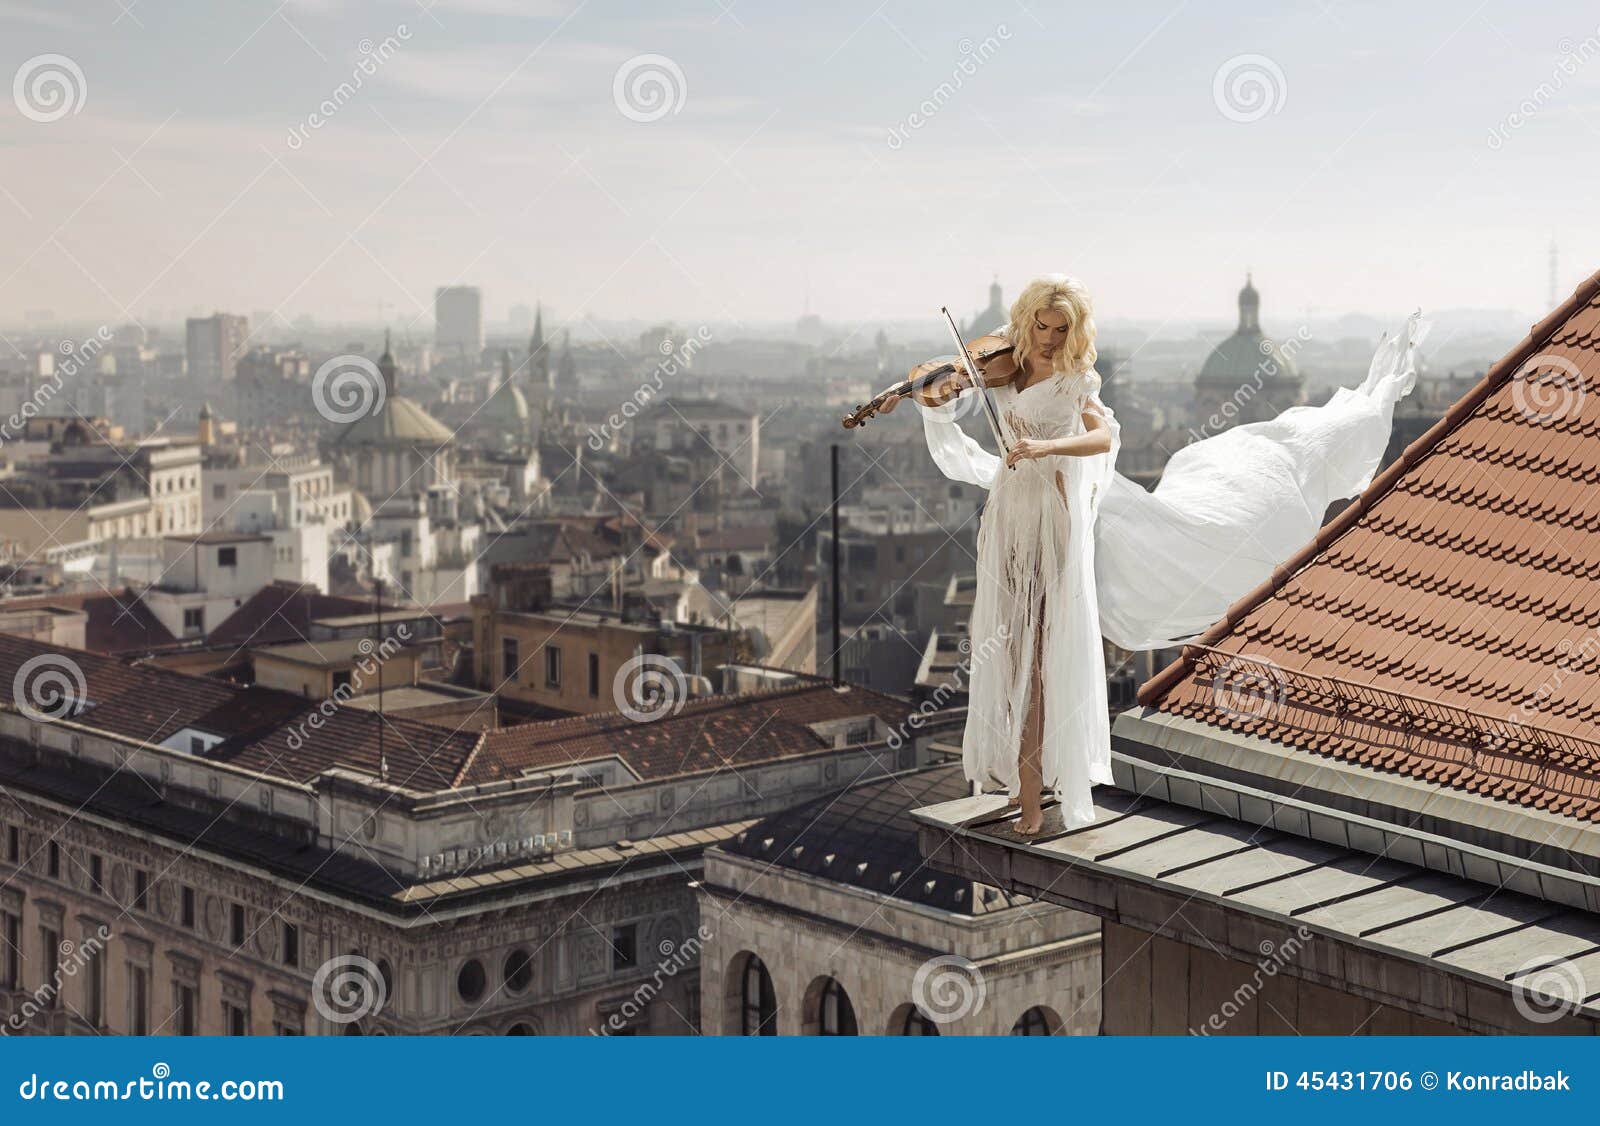 Woman the Violin on the Top of the Edge of the Roof Stock Photo - Image of freedom, artistic: 45431706